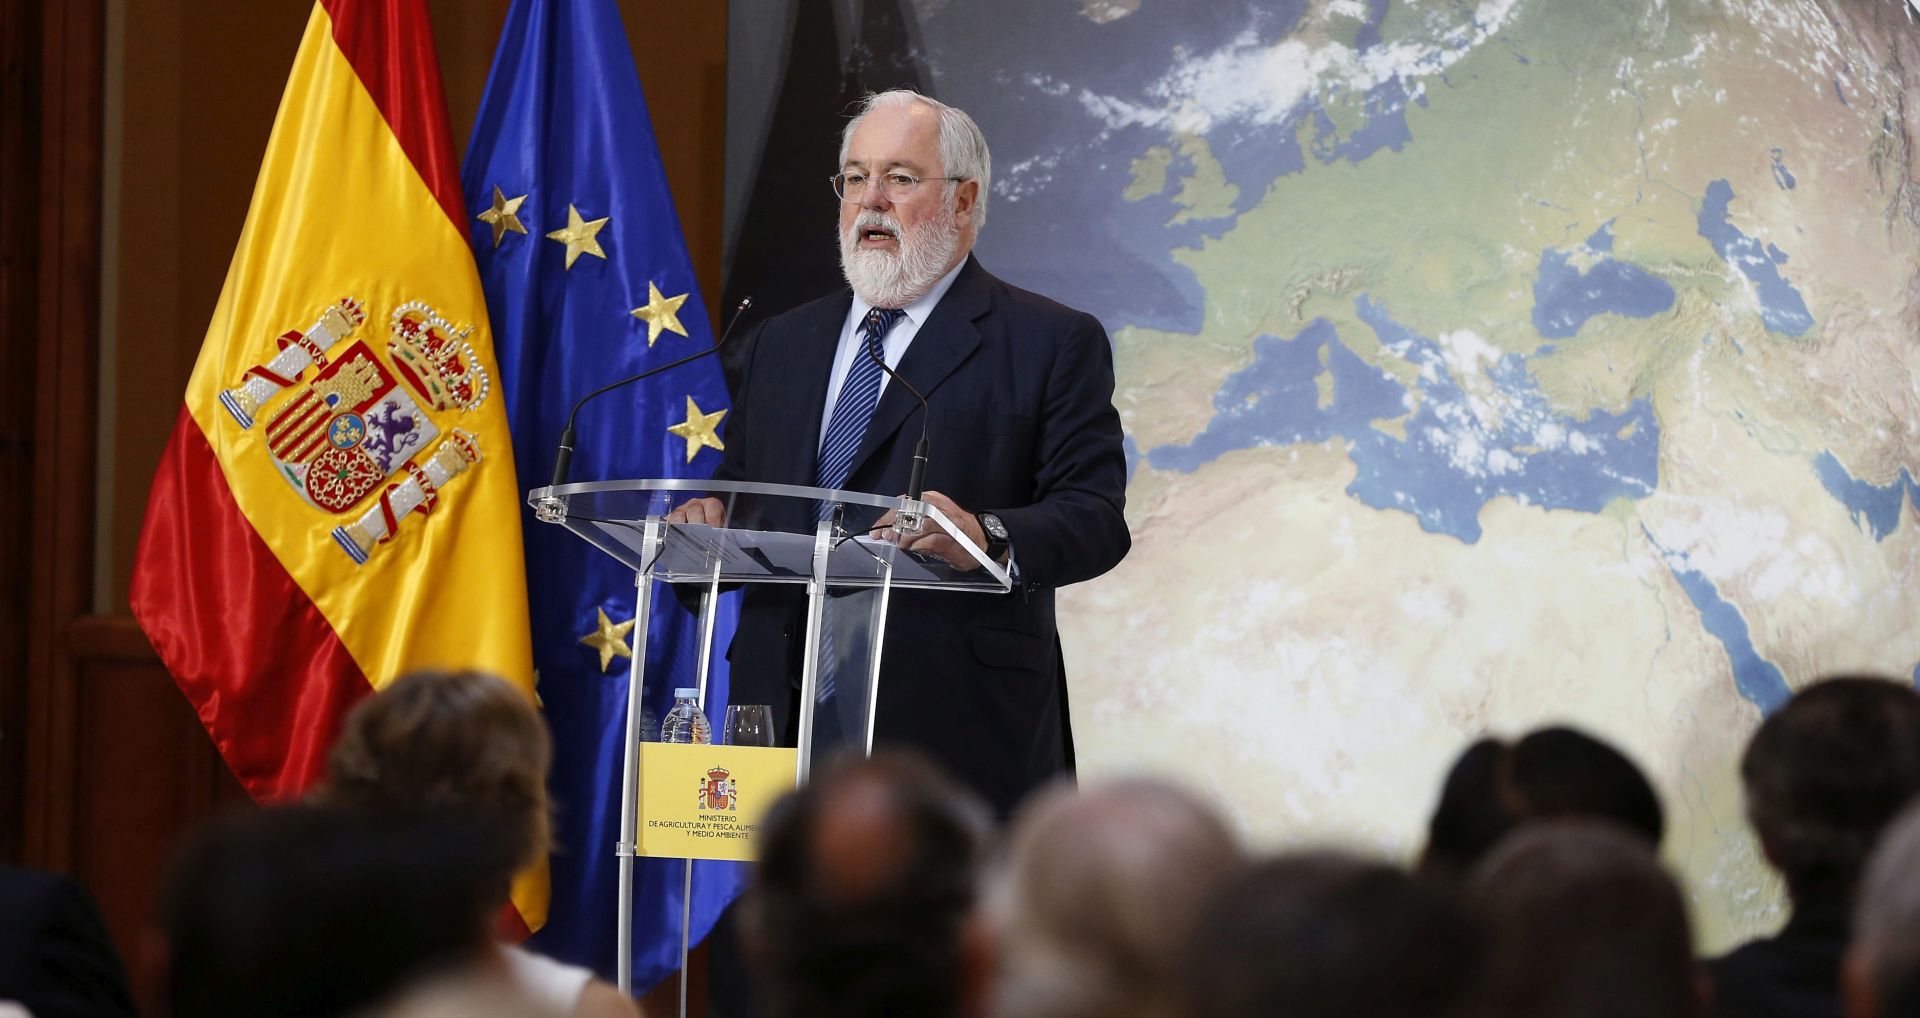 epa05988356 European Commissioner for Climate Action and Energy policies, Miguel Arias Canete delivers a speech during the opening of the debate conference on Climate Change and Energy Transitional Period in Madrid, Spain, 25 May 2017.  EPA/CHEMA MOYA